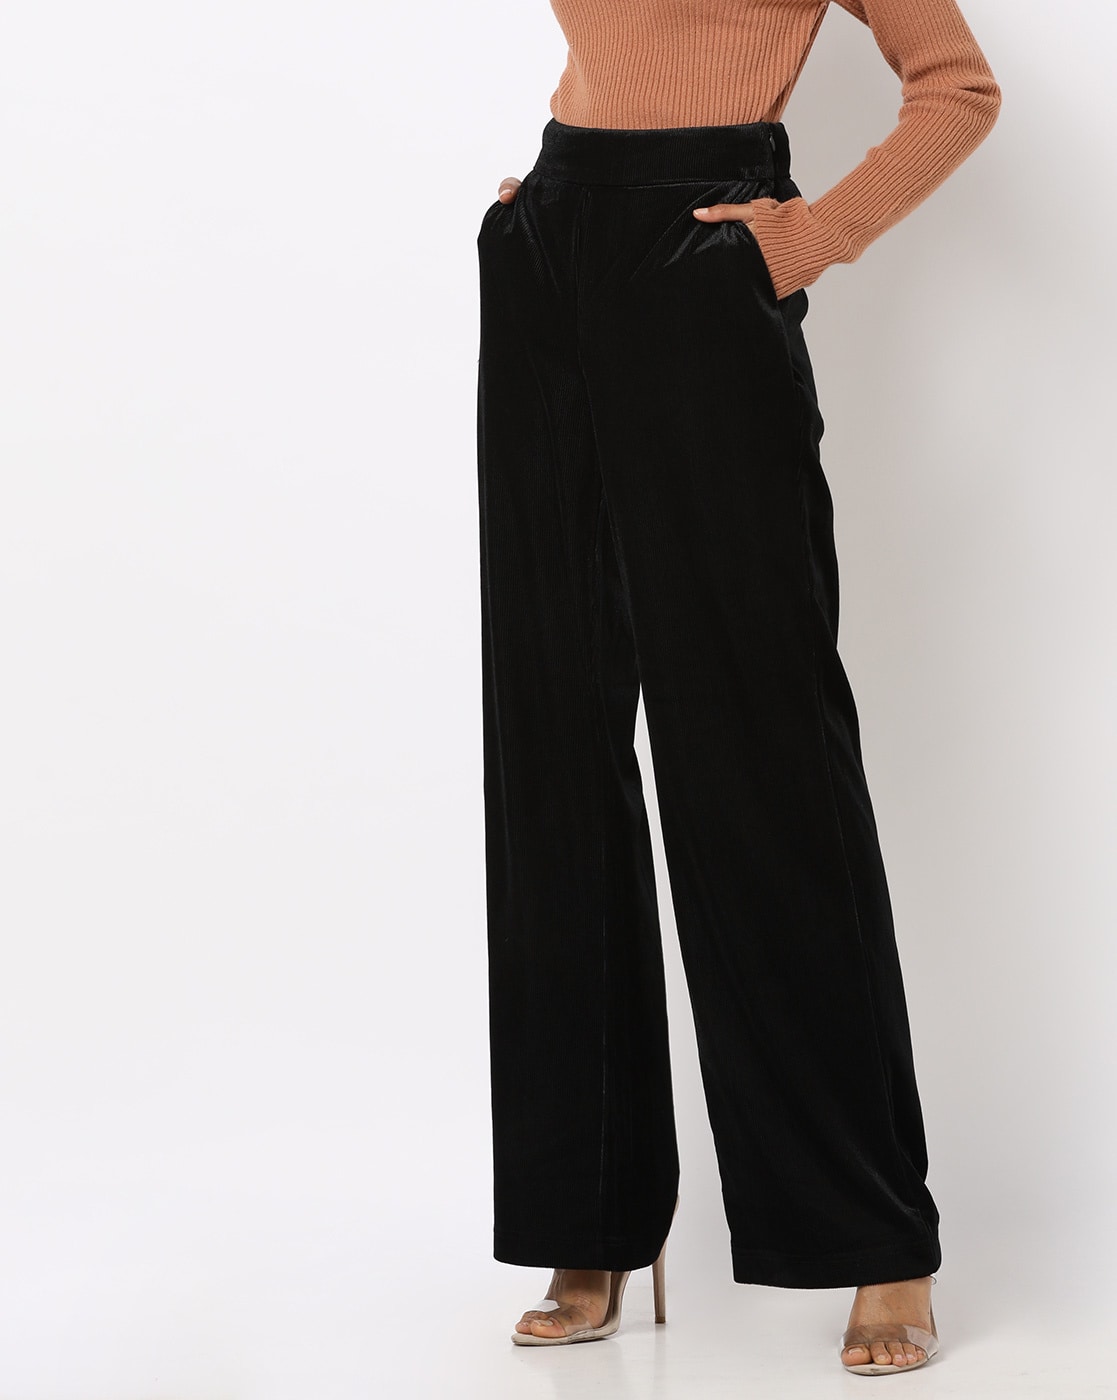 Buy Green Trousers & Pants for Women by SAM Online | Ajio.com